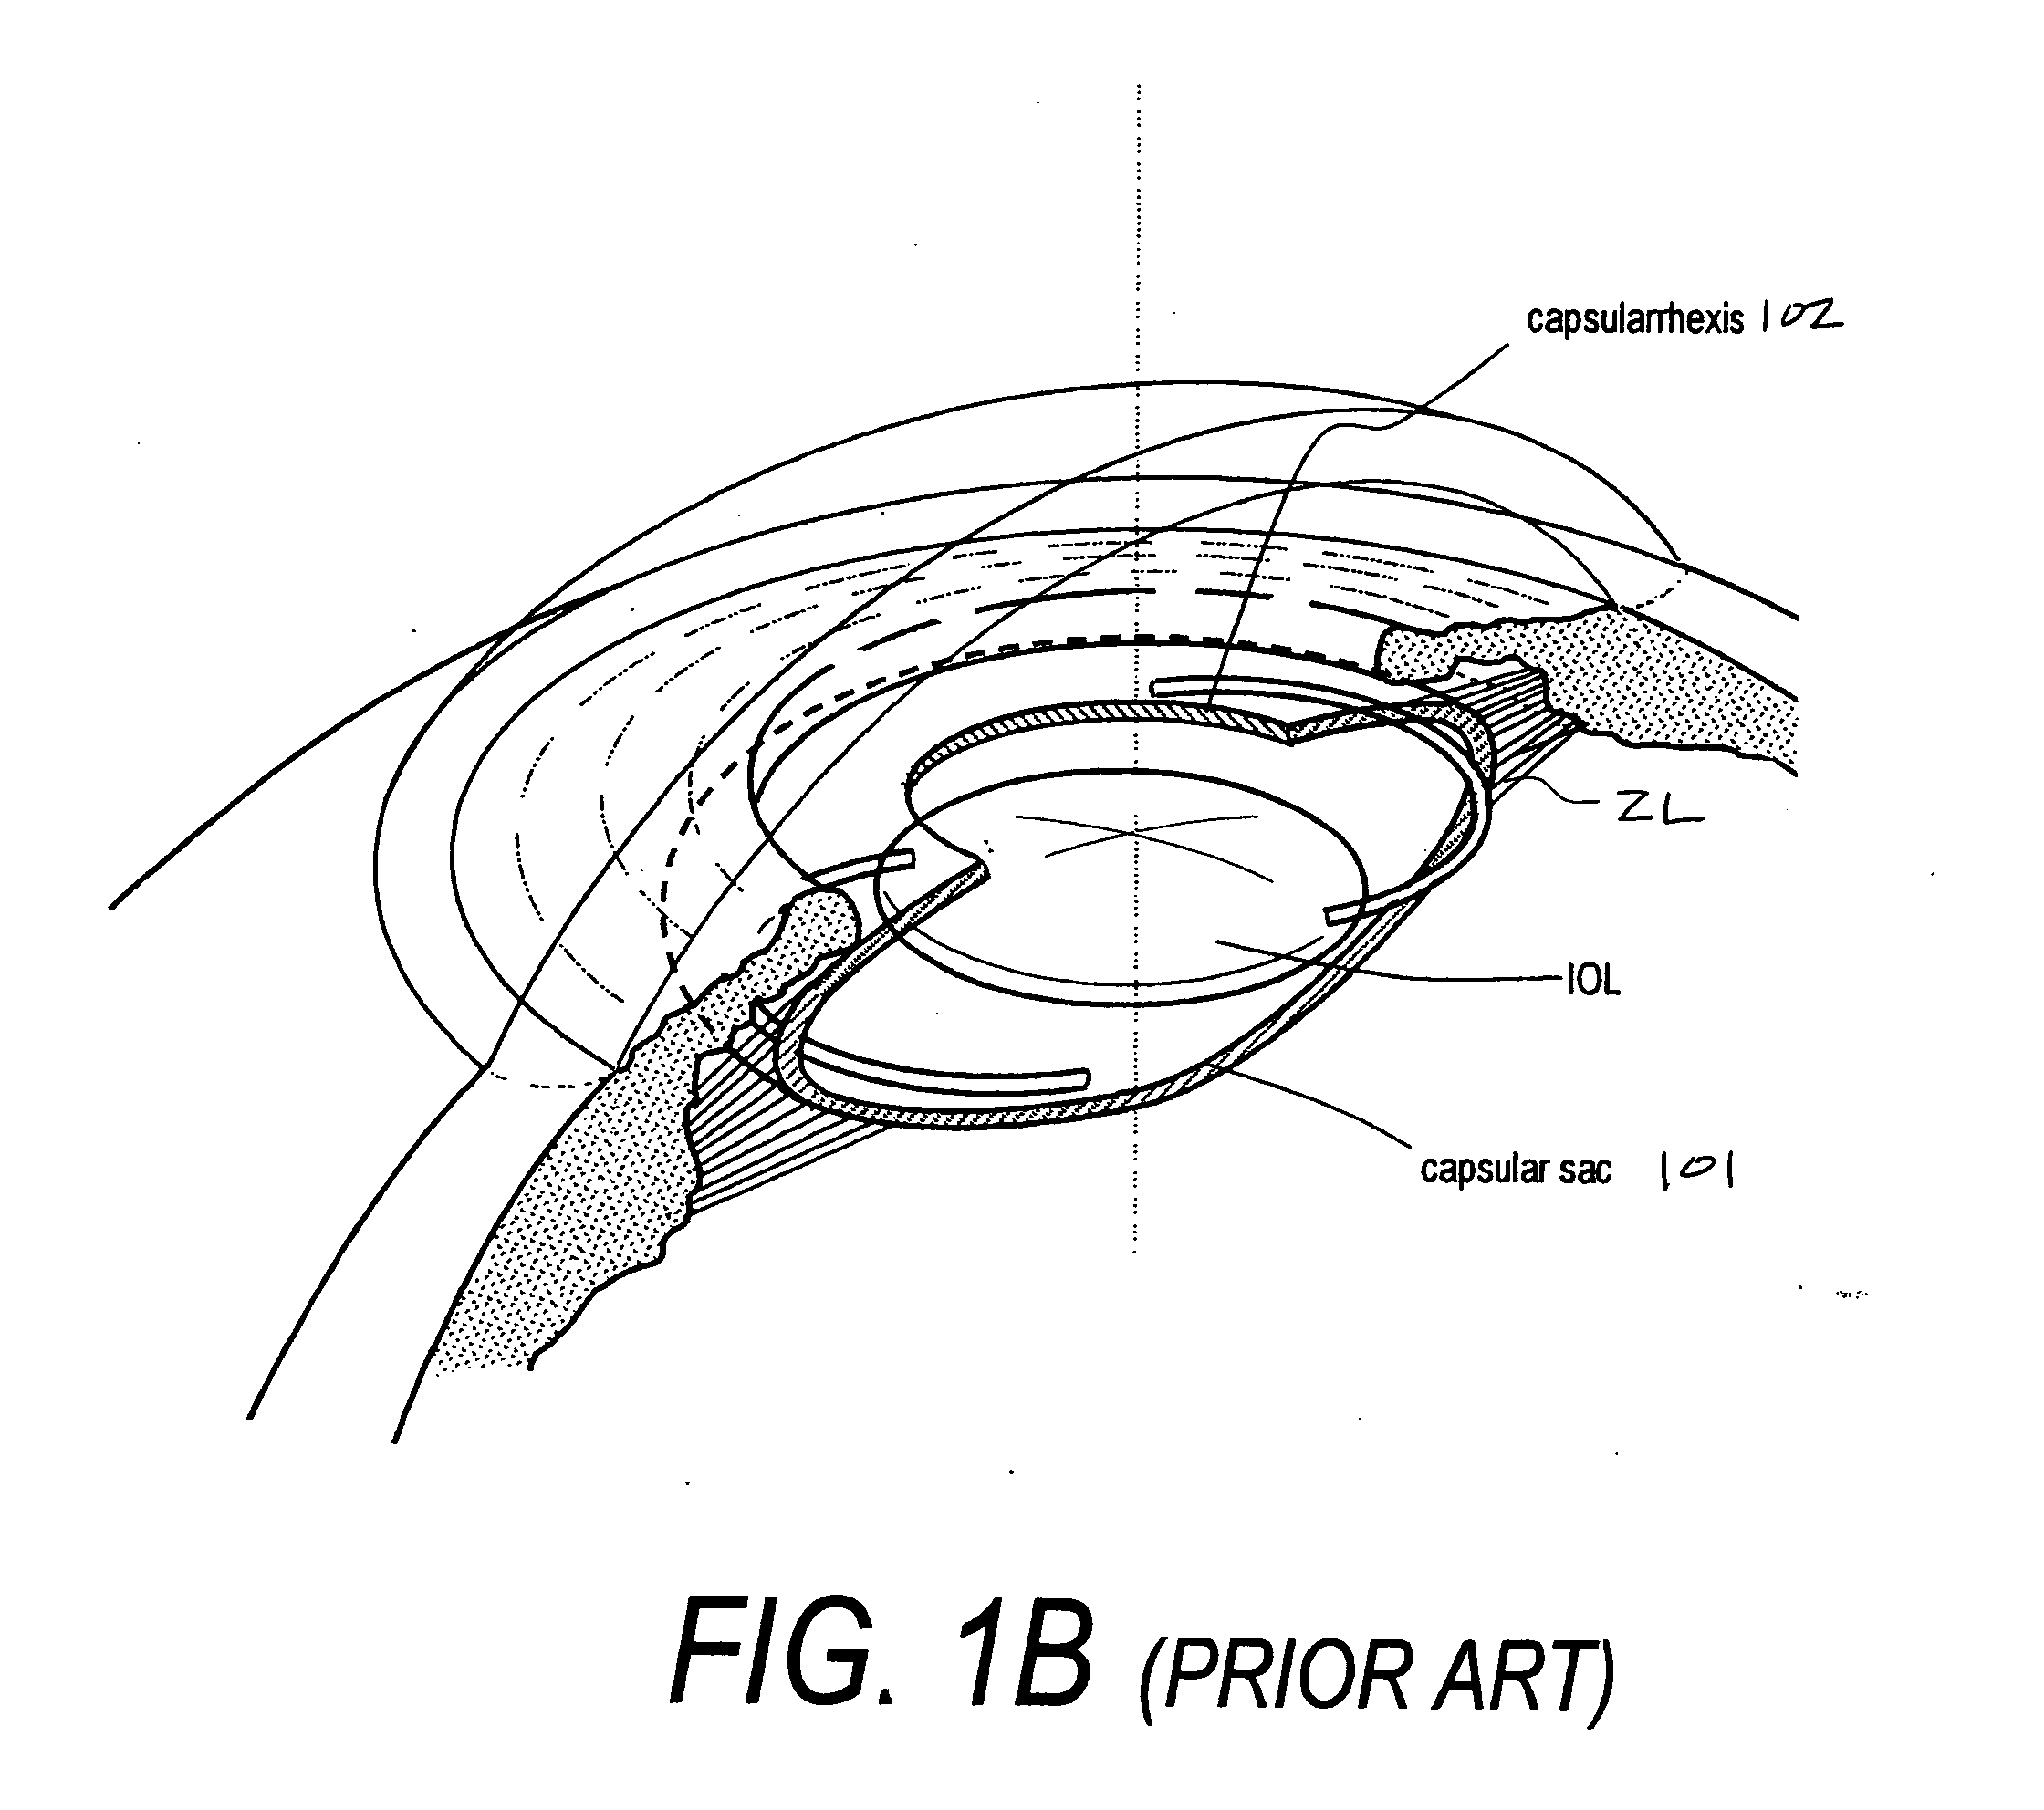 Ophthalmic devices, methods of use and methods of fabrication